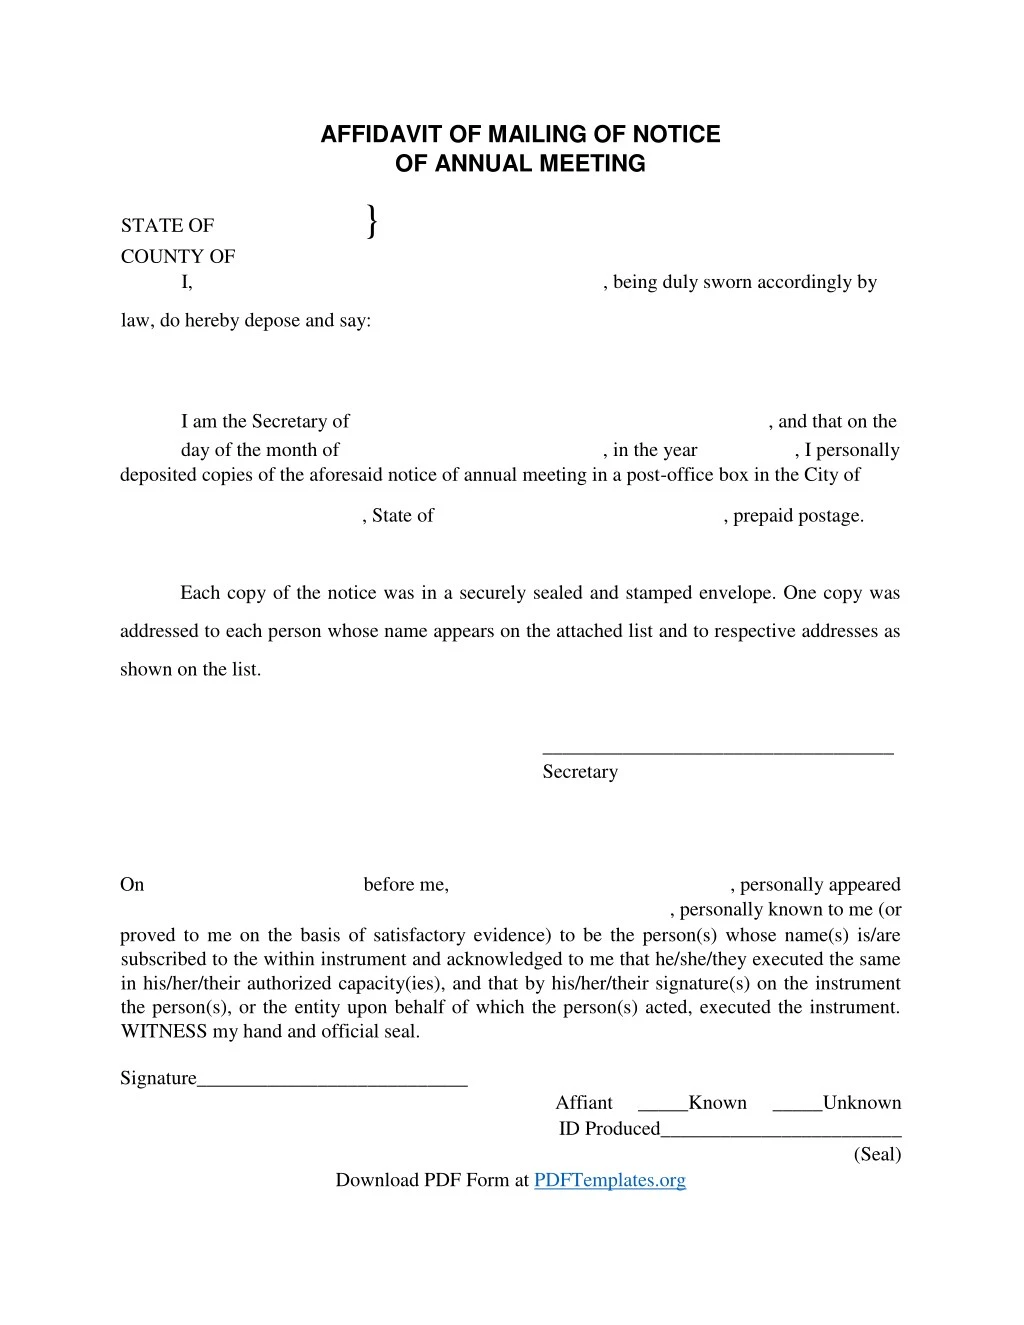 affidavit of mailing of notice of annual meeting